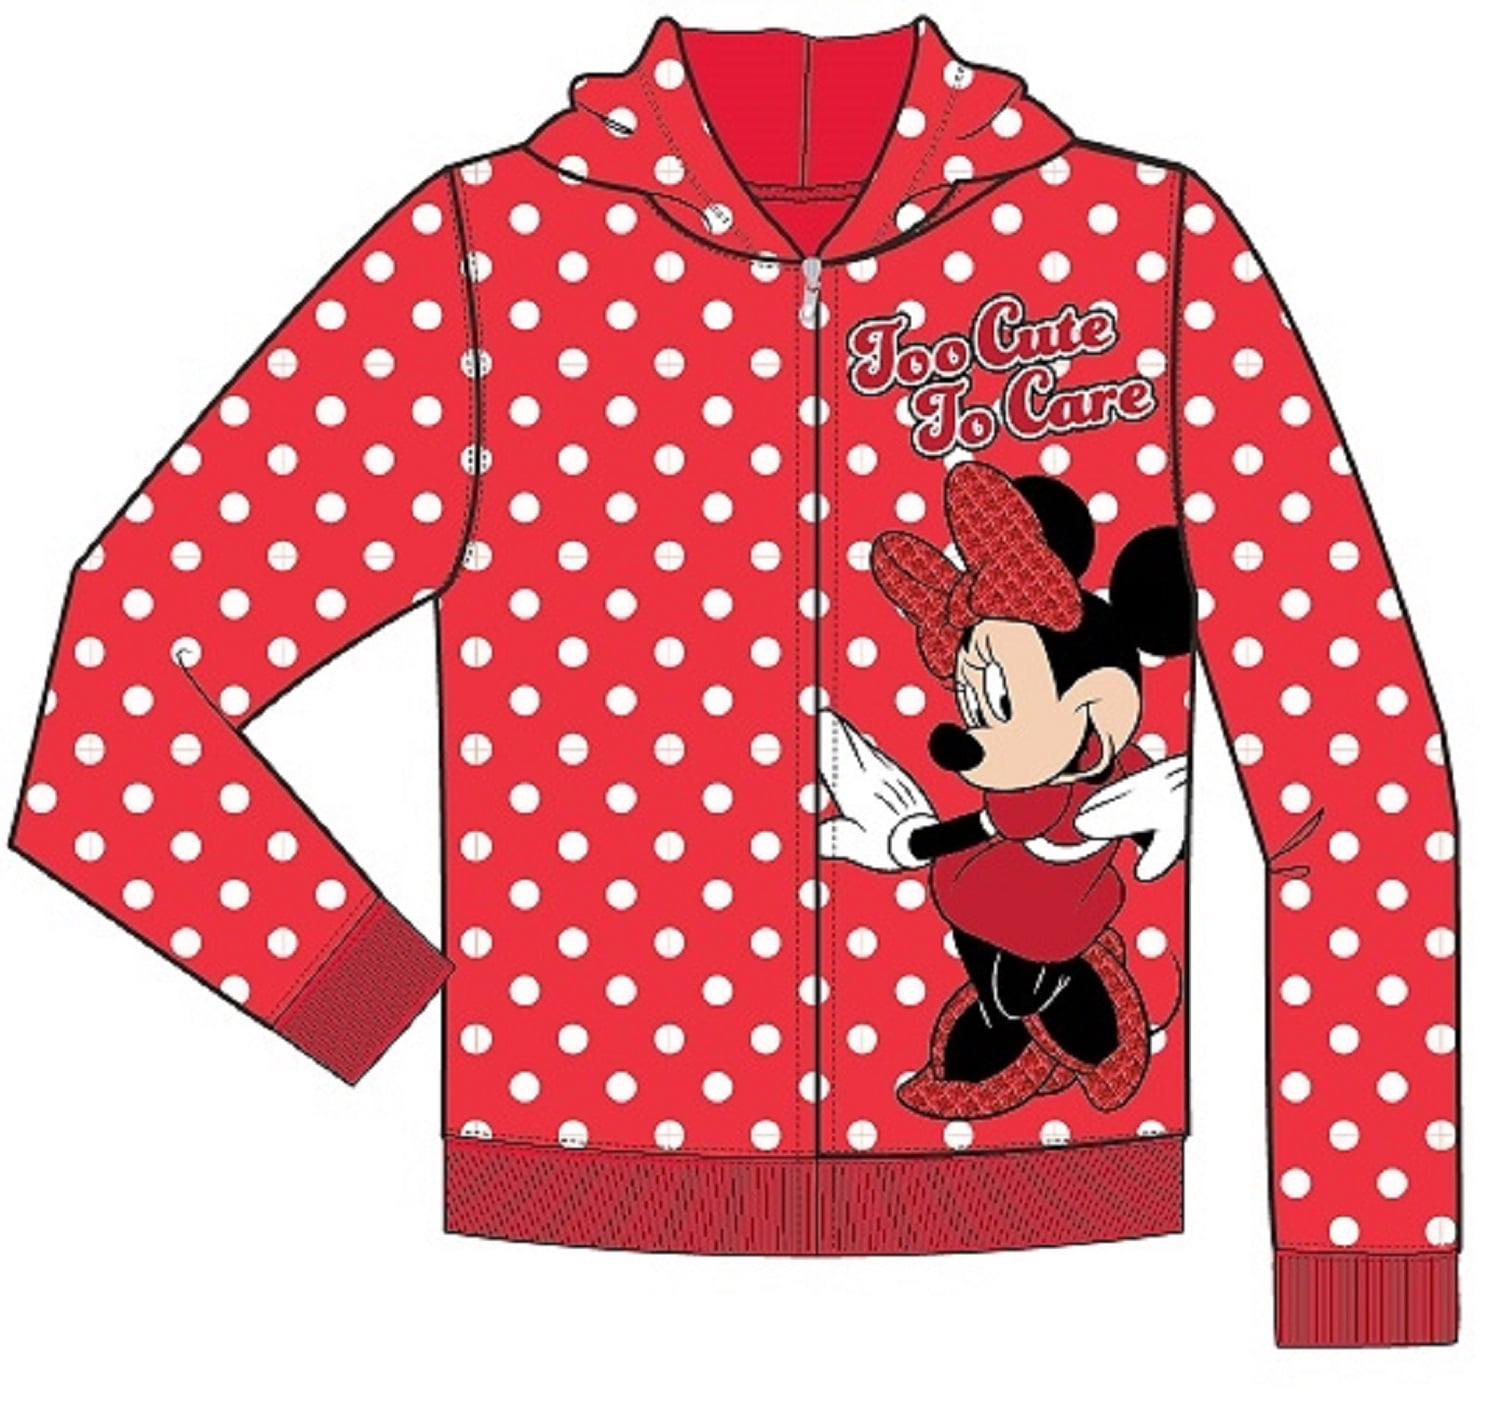 Details about  / New girl/'s  kids/' Cartoon Mickey Minnie zipped Jacket top size 3-7yrs